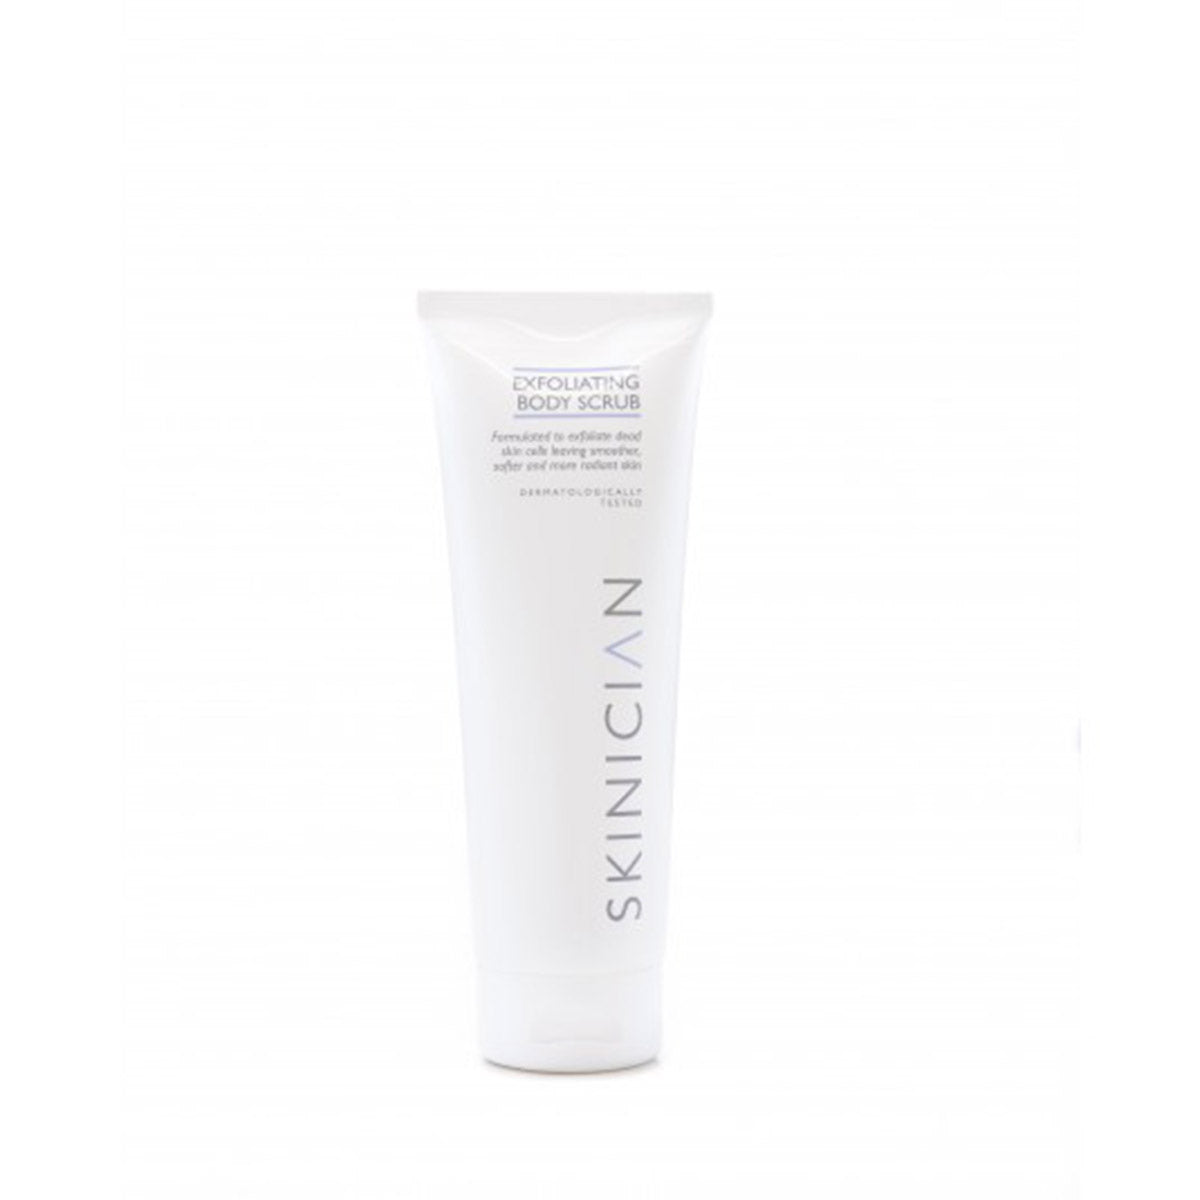 Skinician Exfoliating Body Scrub - Skinician - Touch of an Angel Wellness and Beauty